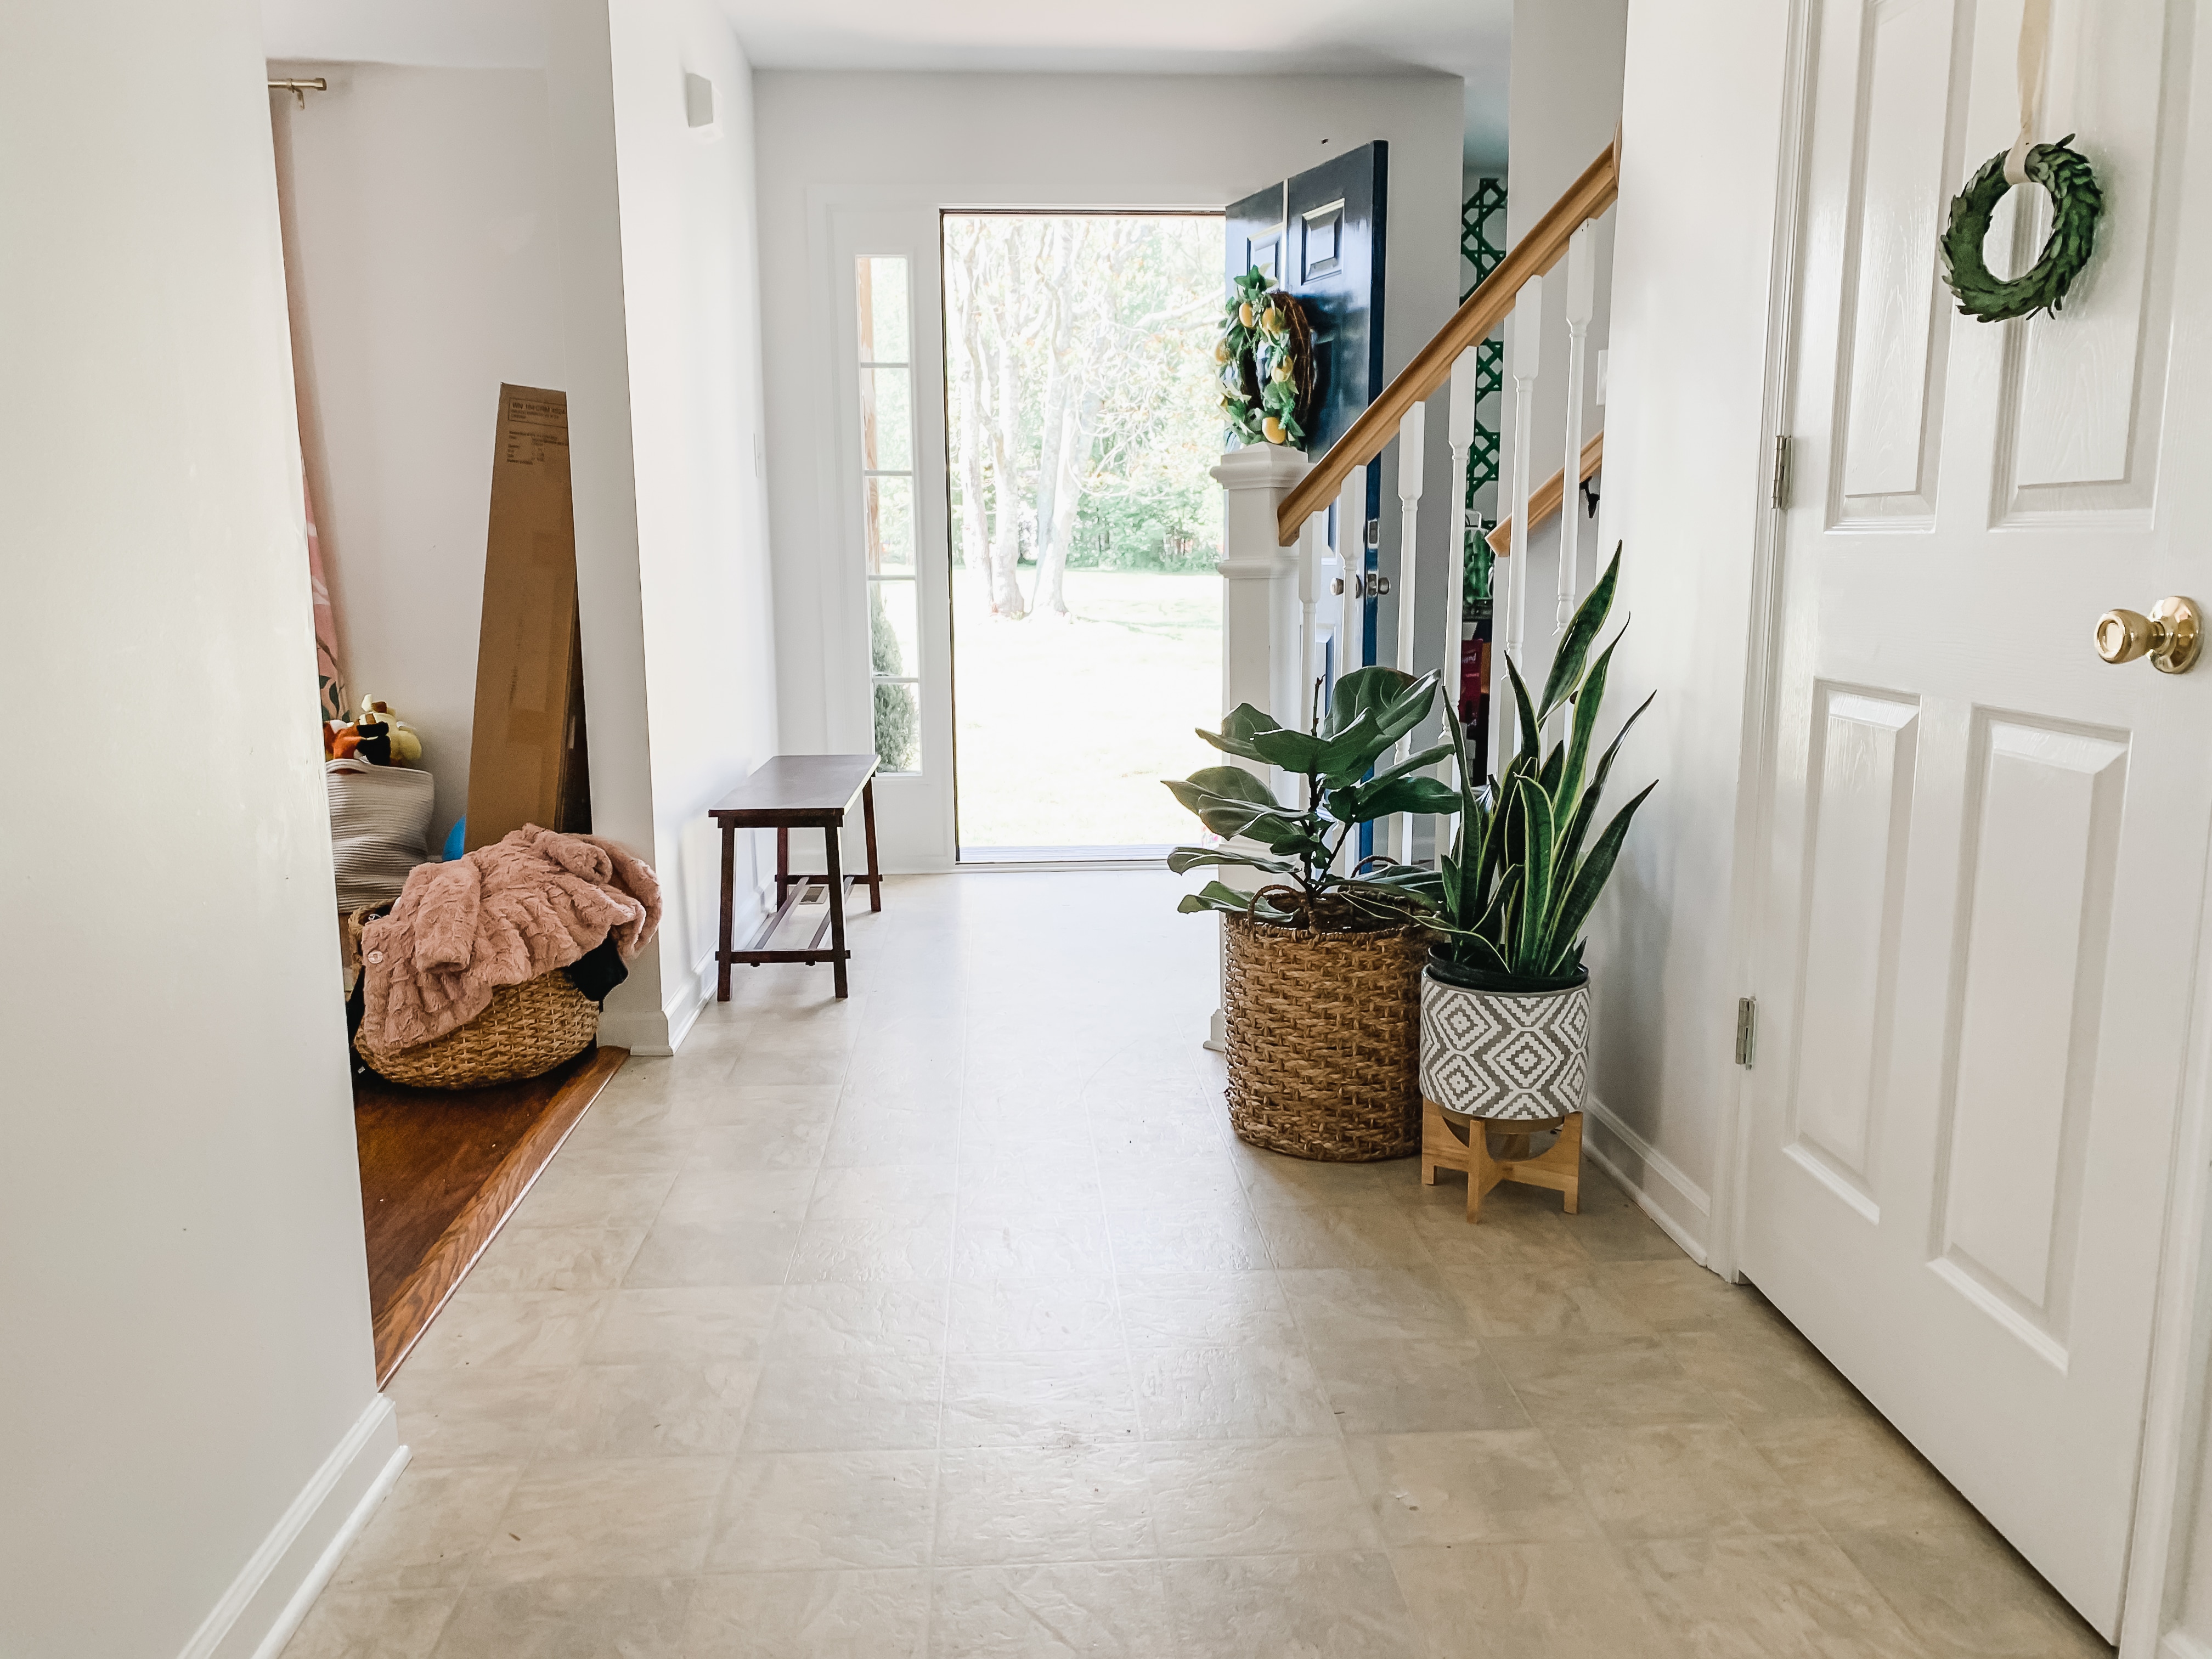 Before photos of Entryway for Spring 2020 One Room Challenge